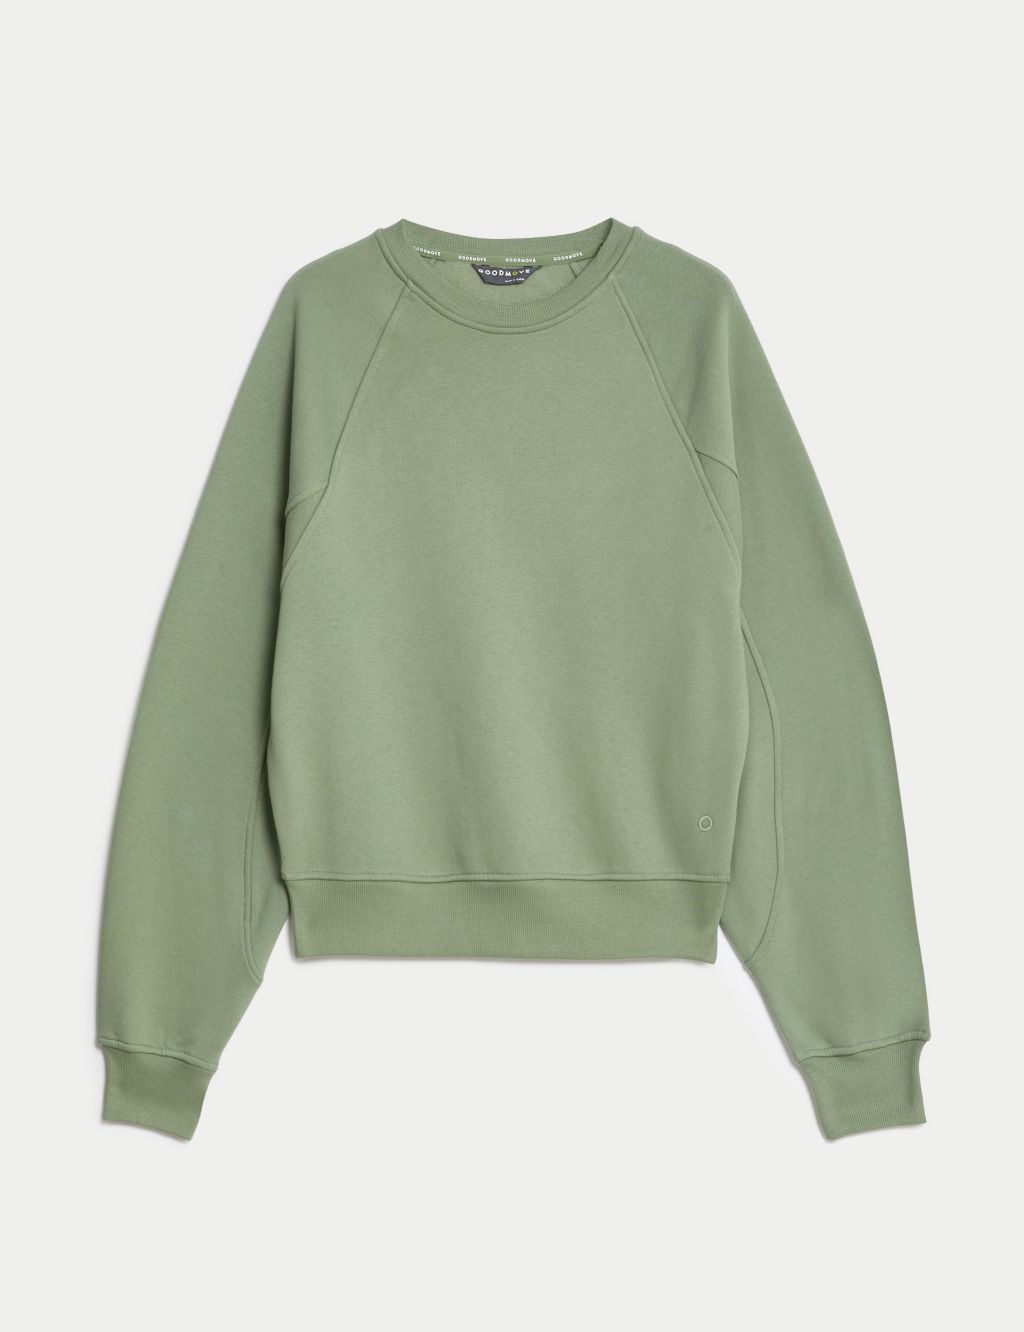 Cotton Rich Crew Neck Relaxed Sweatshirt image 2